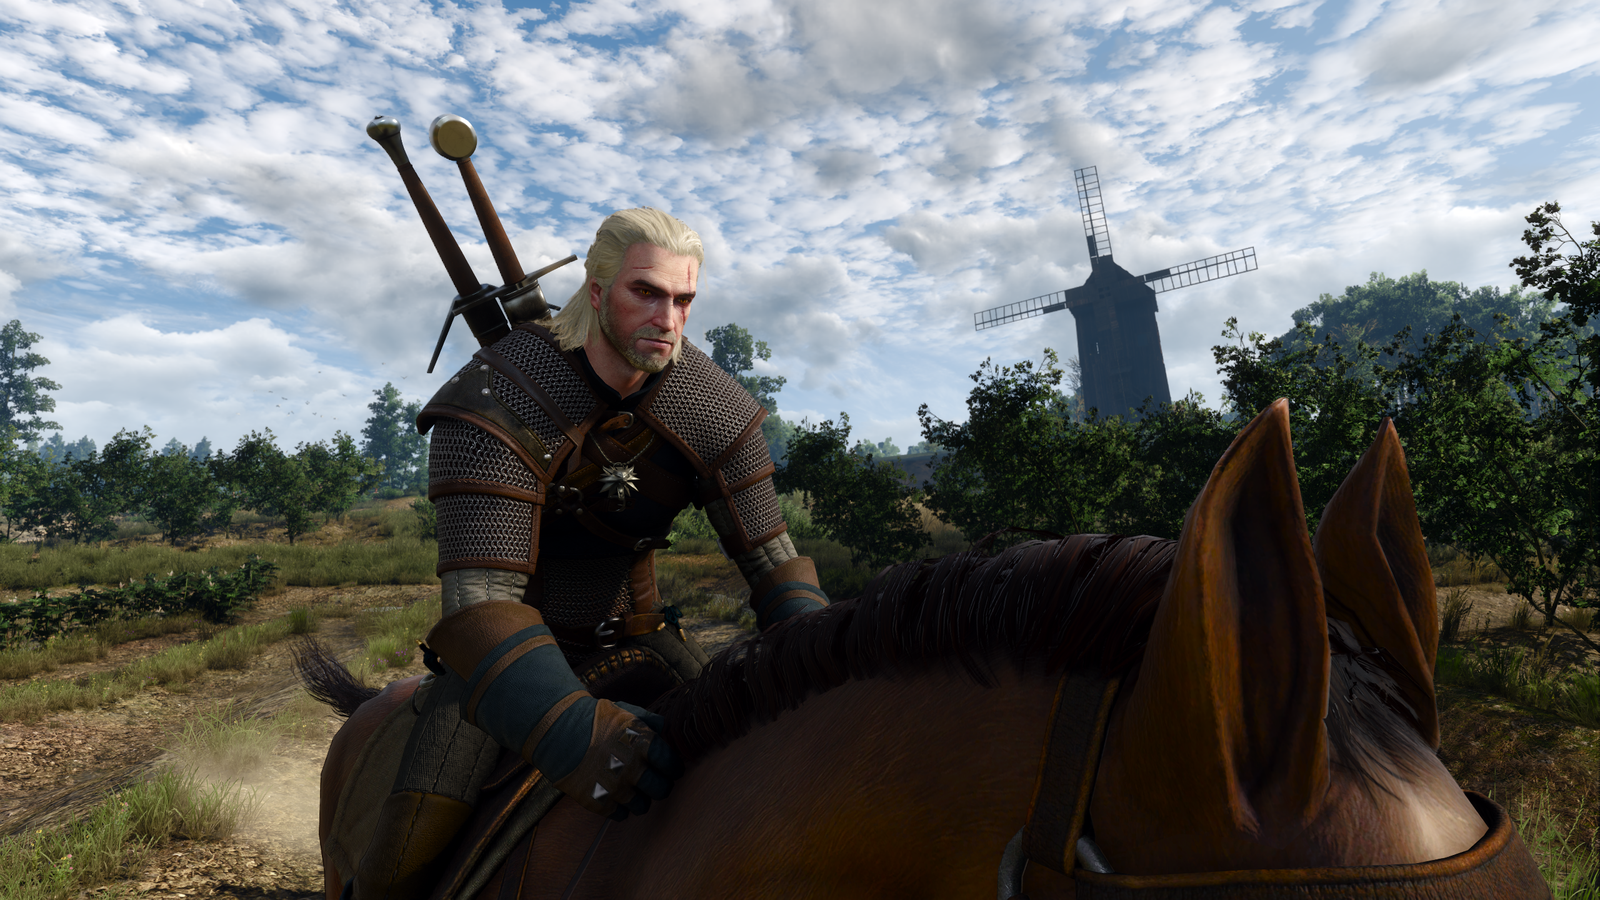 The Witcher 3's latest patch improves the frame rate on PS4, hurts